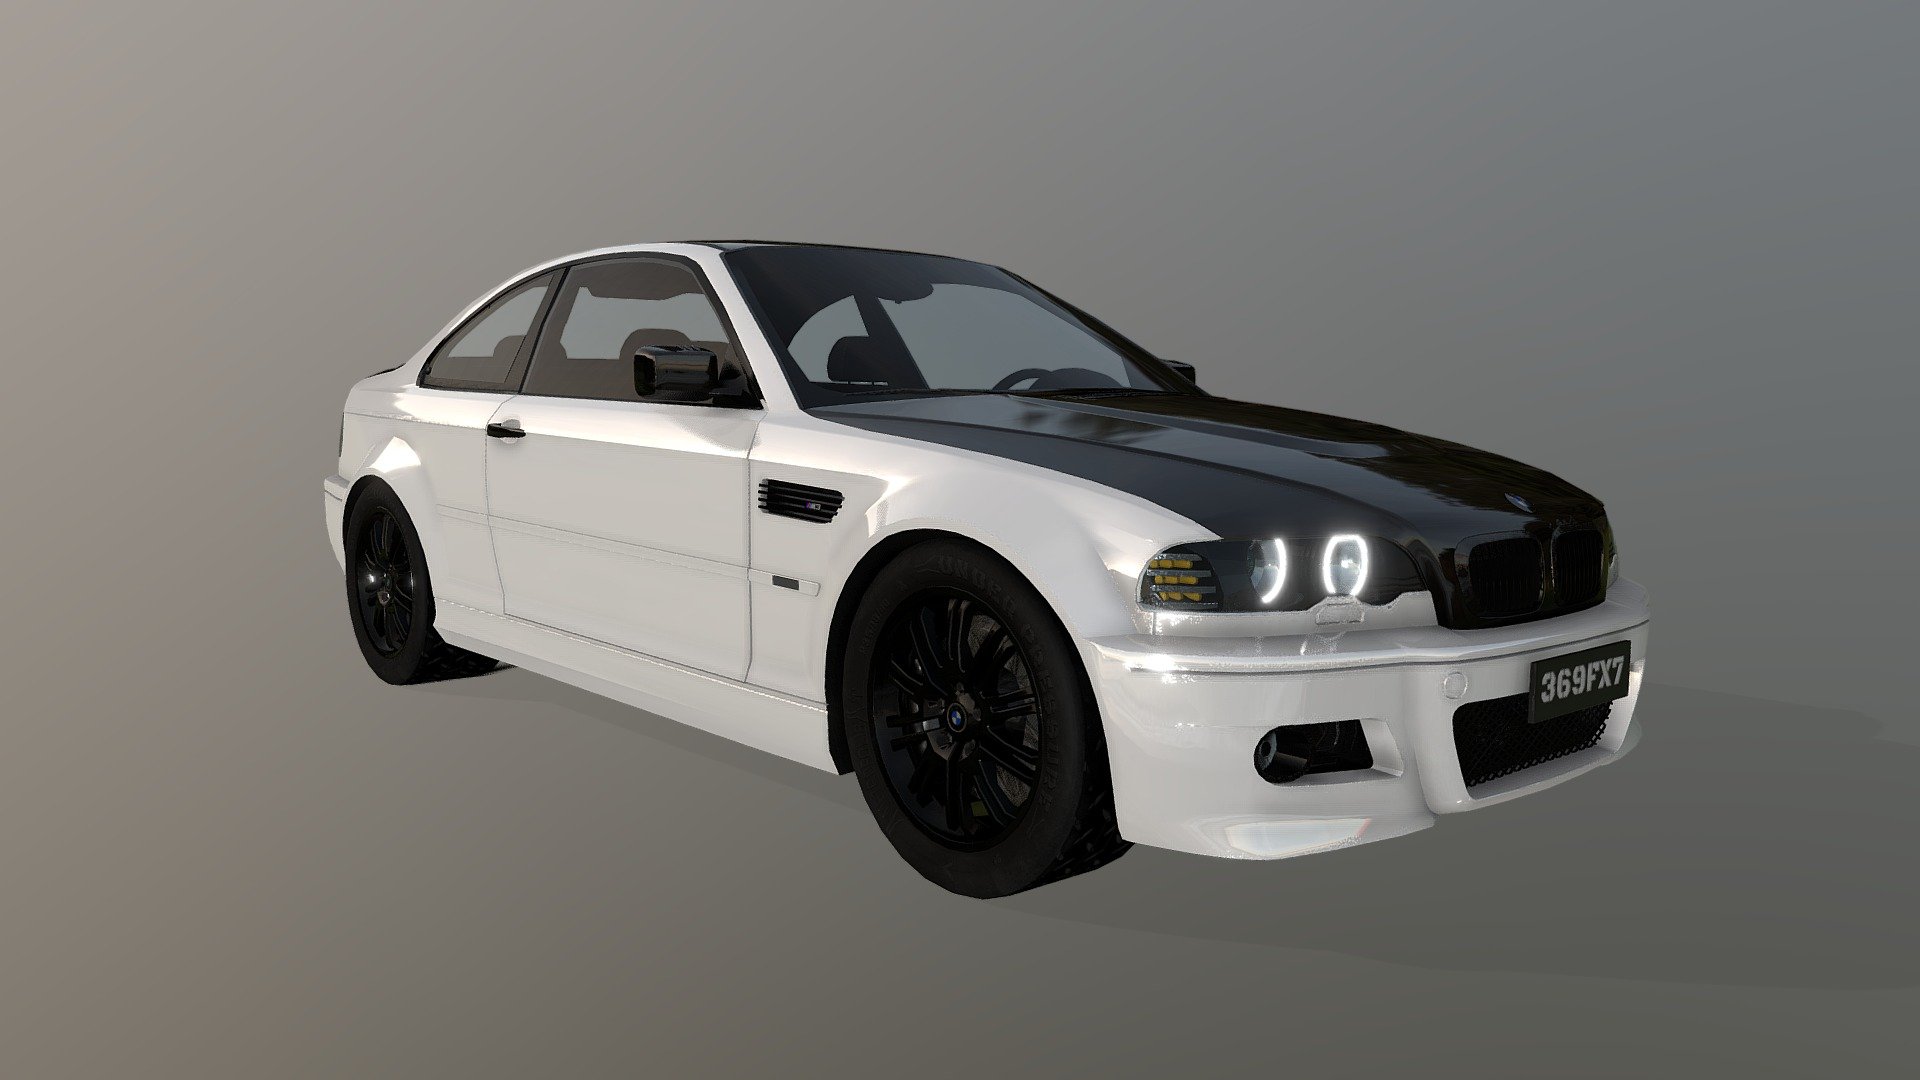 CR's next BM.

Feel free to use in your personal projects within the bounds of the Editorial License, the Graphic Novel is not copywrited and never will be (Produced by Me).

If you want this car for free the original model is downloadable from: https://sketchfab.com/3d-models/bmw-m3-e46-gtr-66314ceeeaf24508824dd574ad04aed2 I used extra parts from this model, maily interior: https://3dwarehouse.sketchup.com/model/c8d3dc95-096e-4f00-a133-28d1b88c3b0b/BMW-M3-E46-StanceNation?hl=en

Good luck making it look this good though 3d model